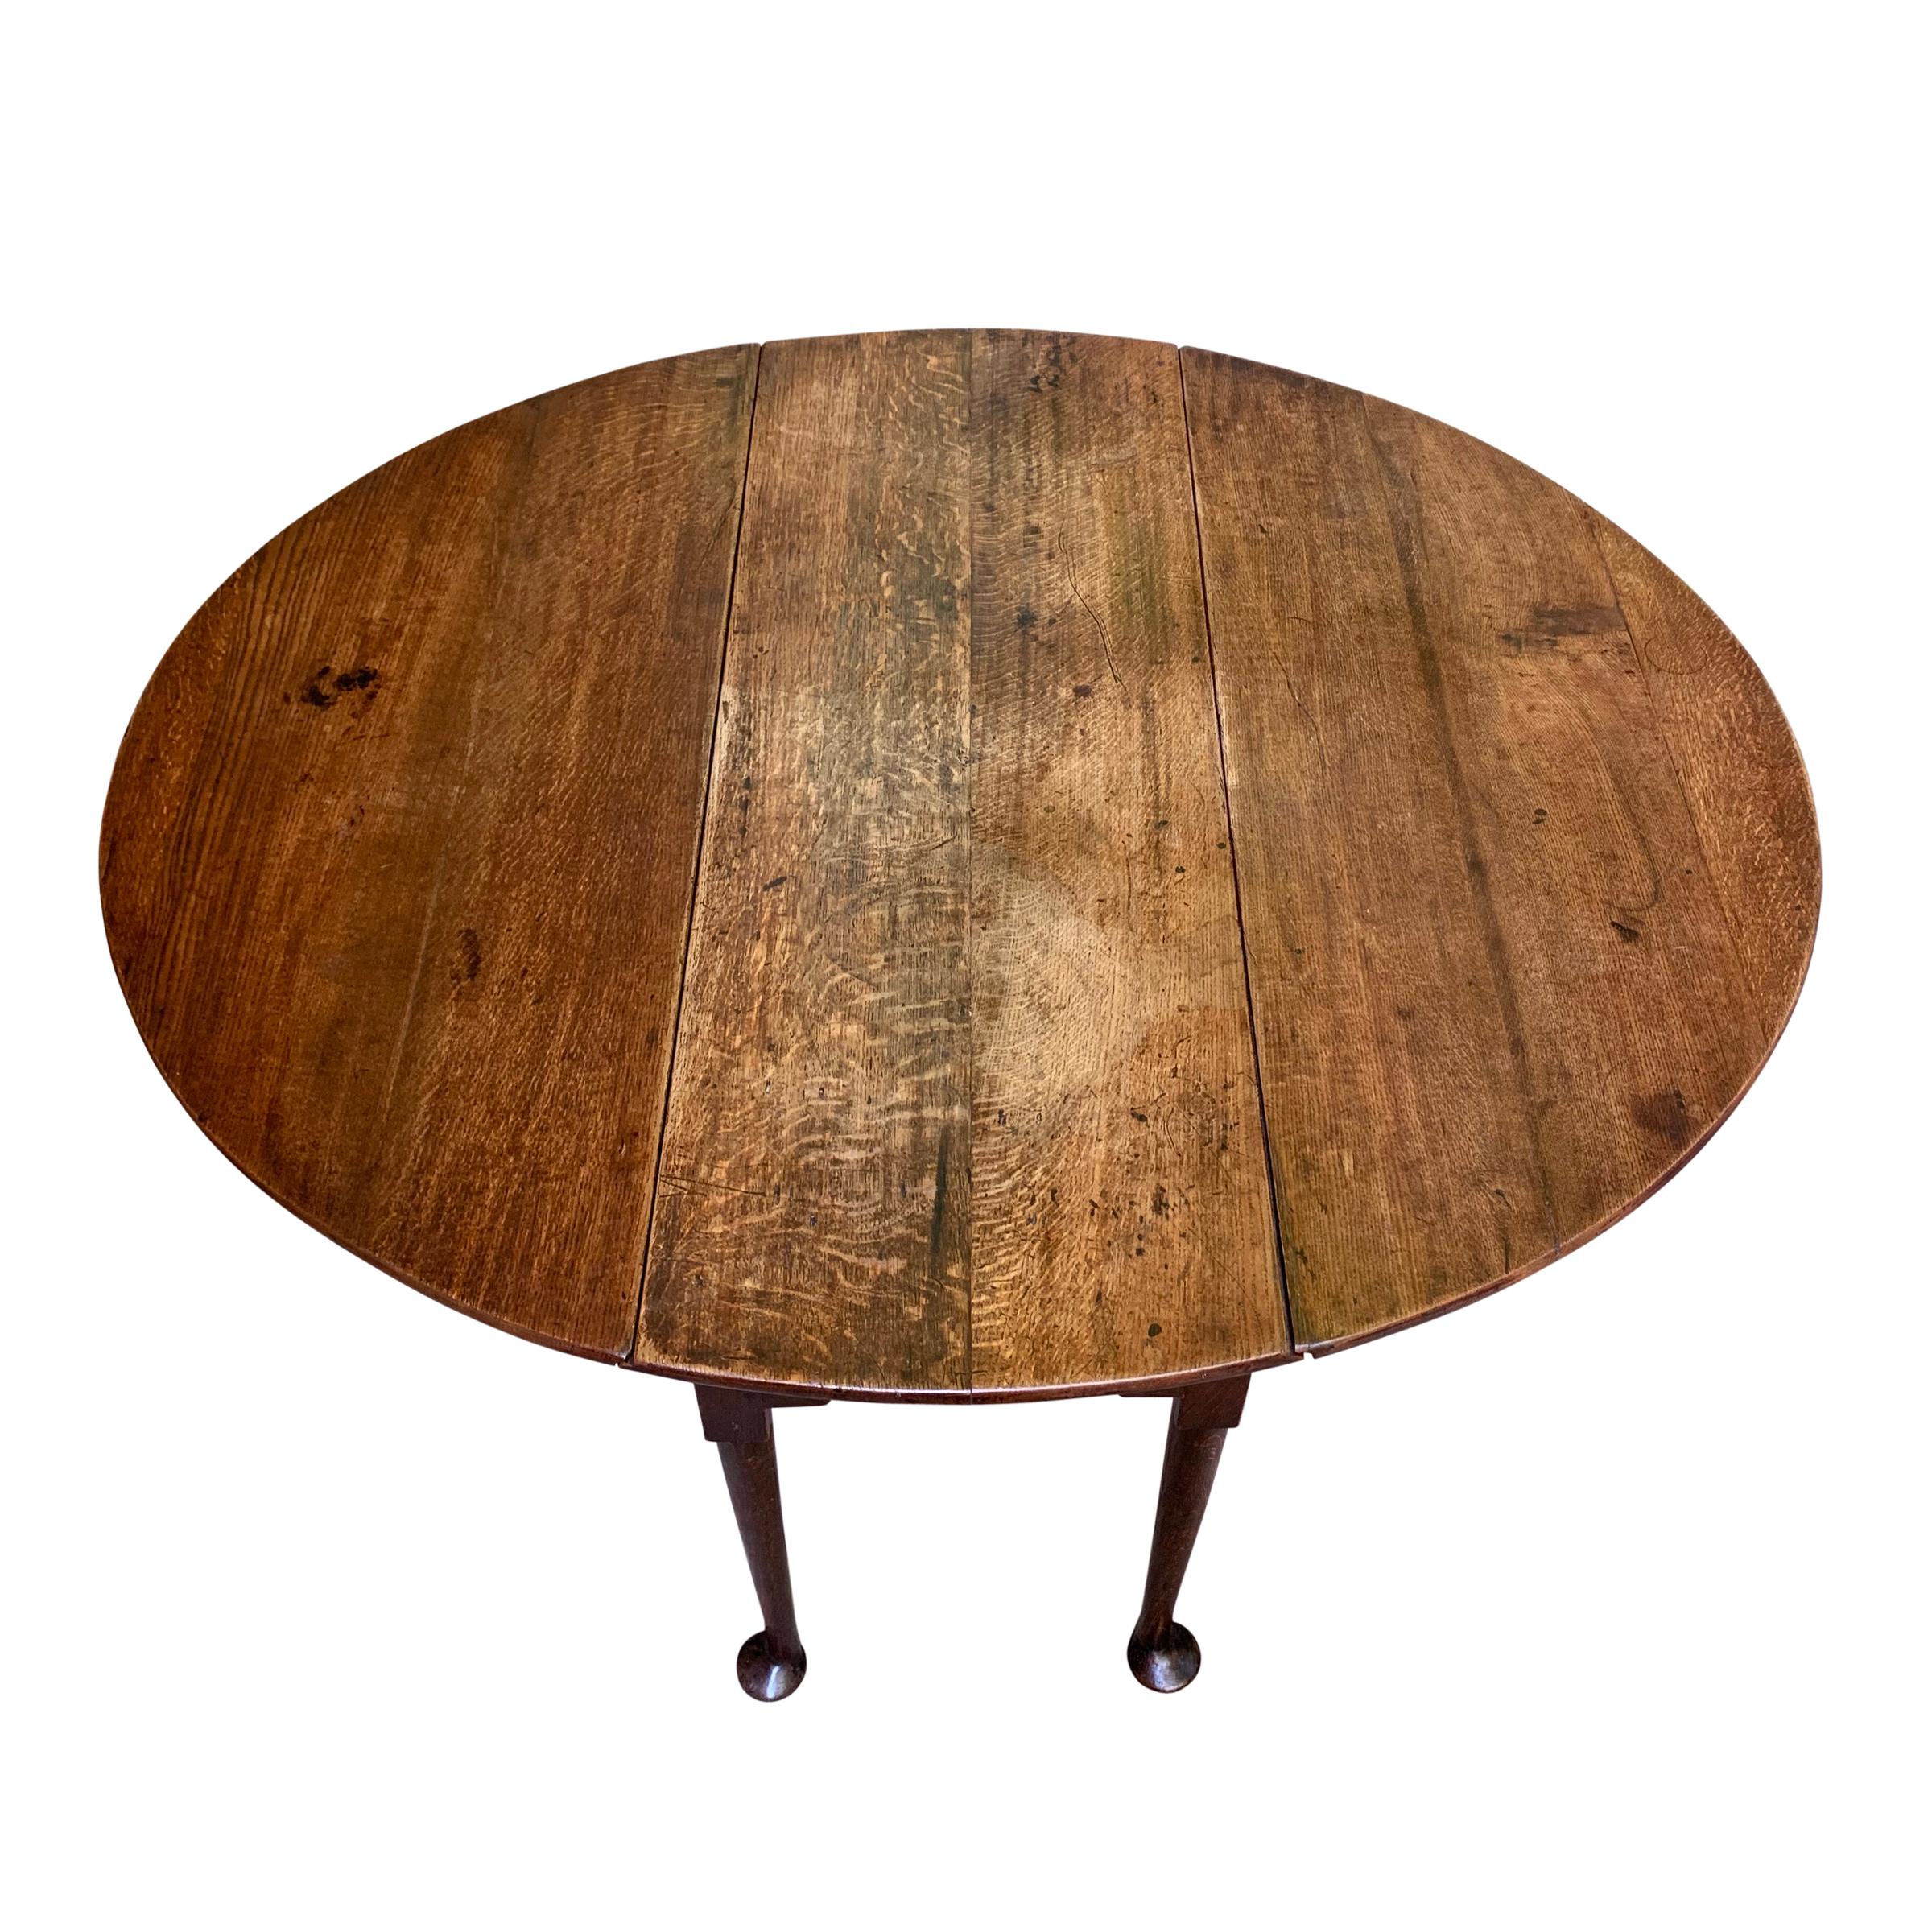 A fantastic early 19th century English Queen Anne oak drop-leaf gate-leg breakfast table with round straight tapered legs ending in wonderfully whimsical large pad feet that give the appearance as though the table could get up and walk away. This